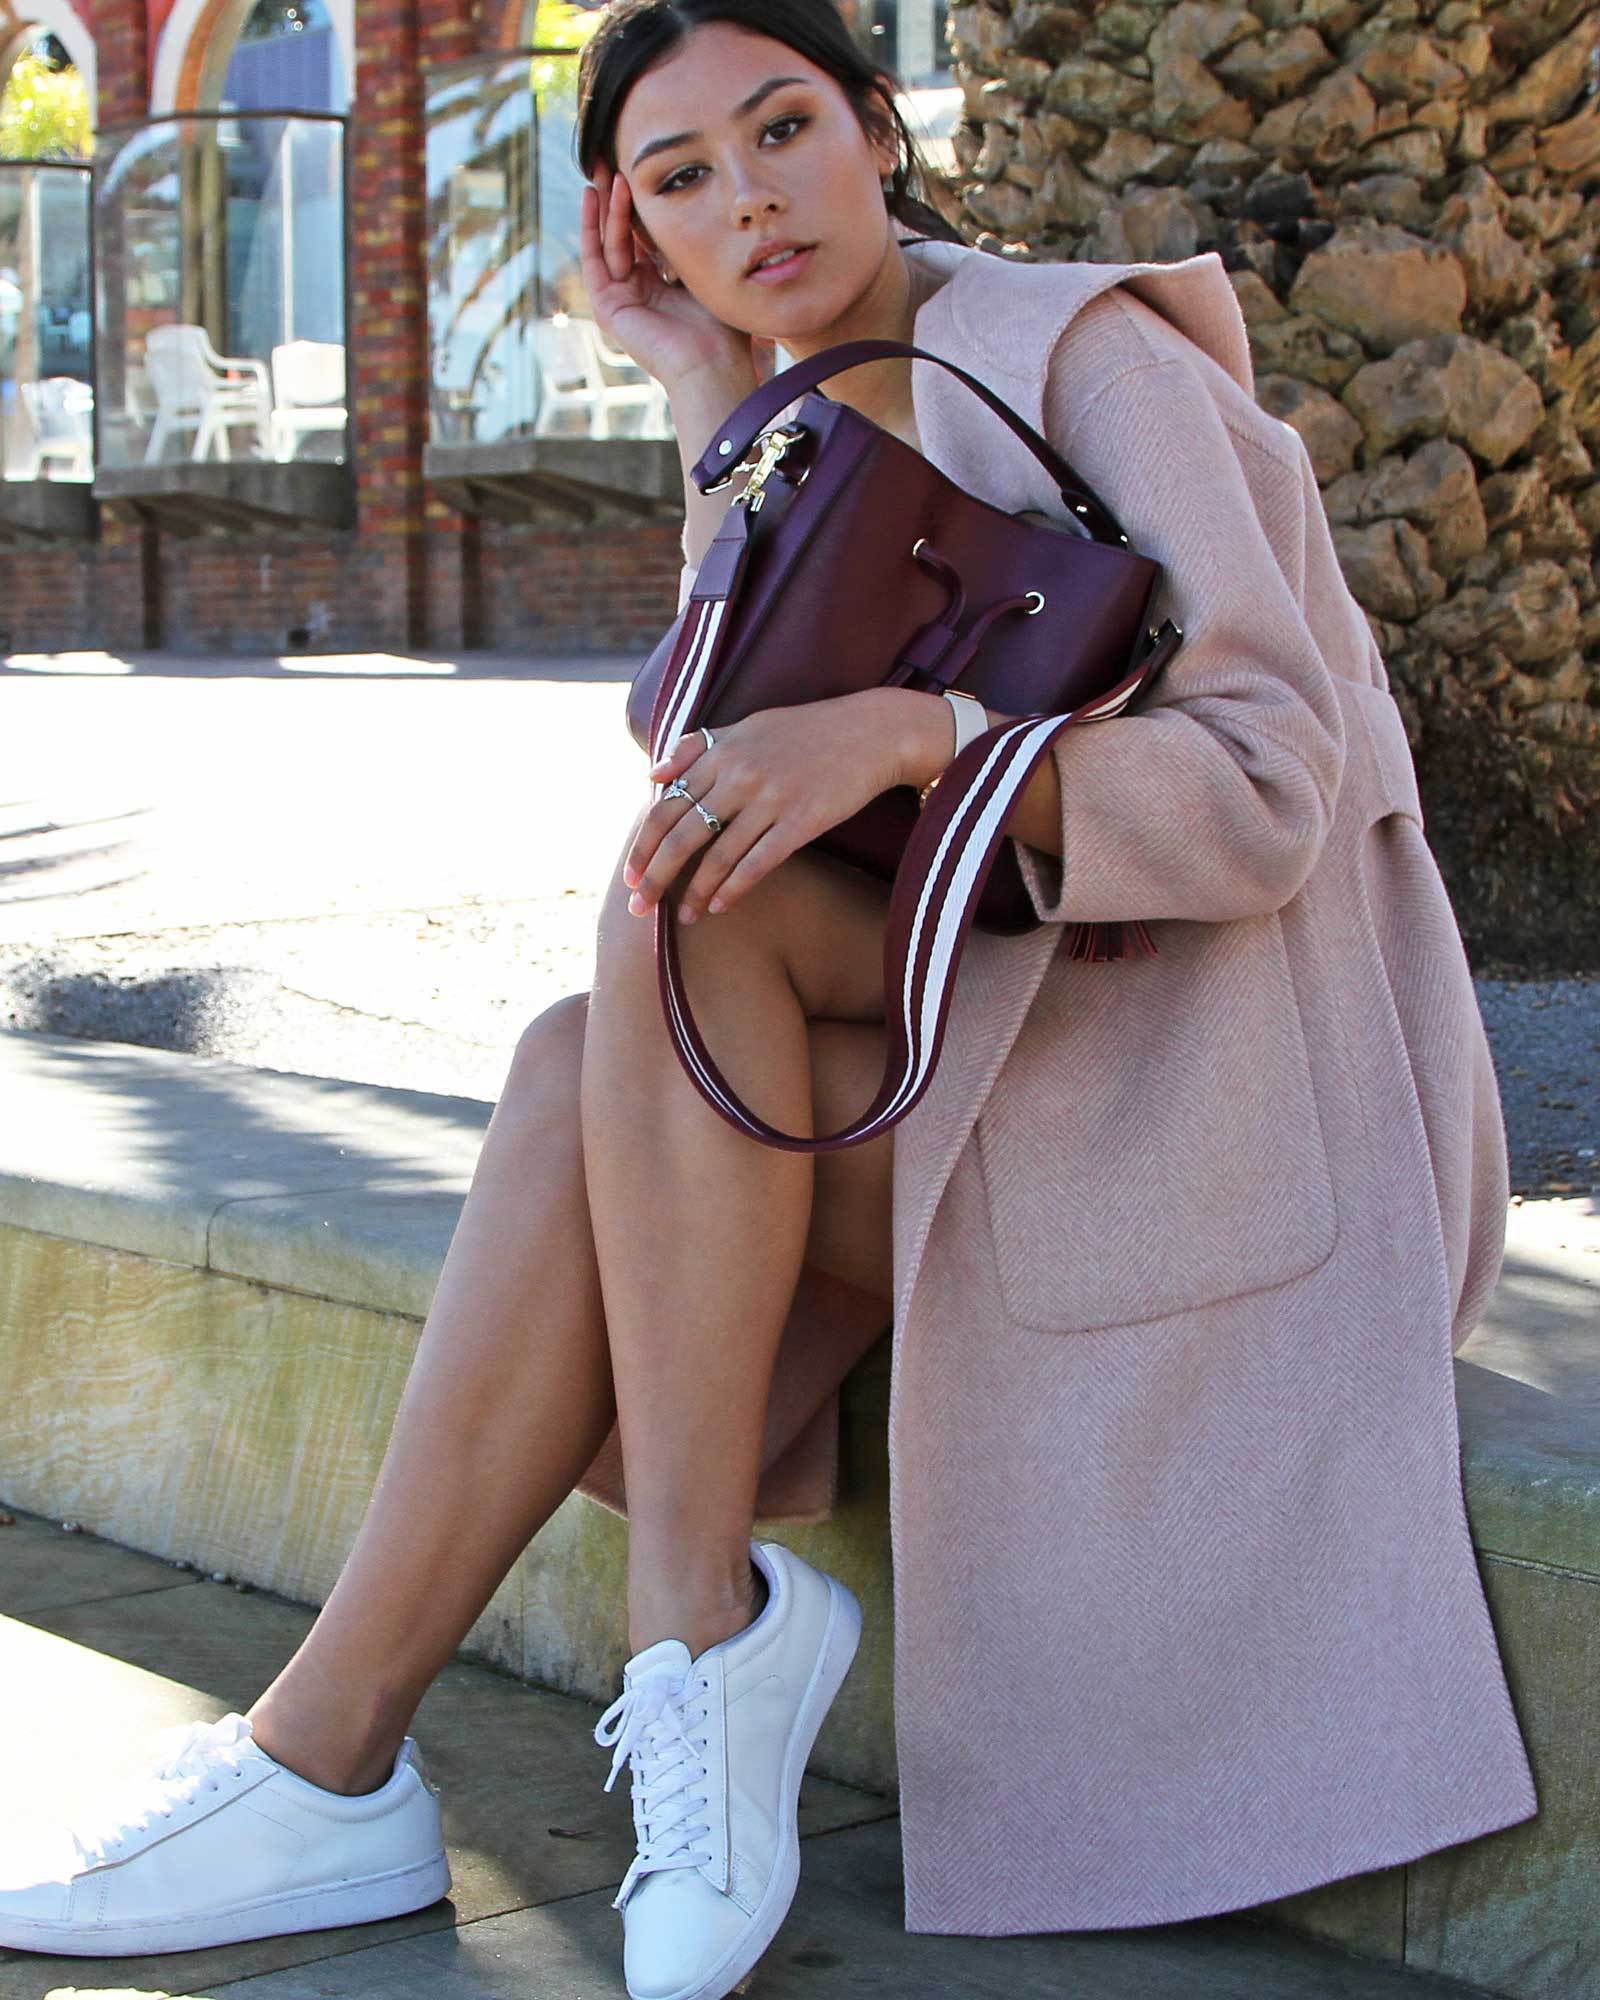 Wool Coats For The Winter - Blush & Blooms